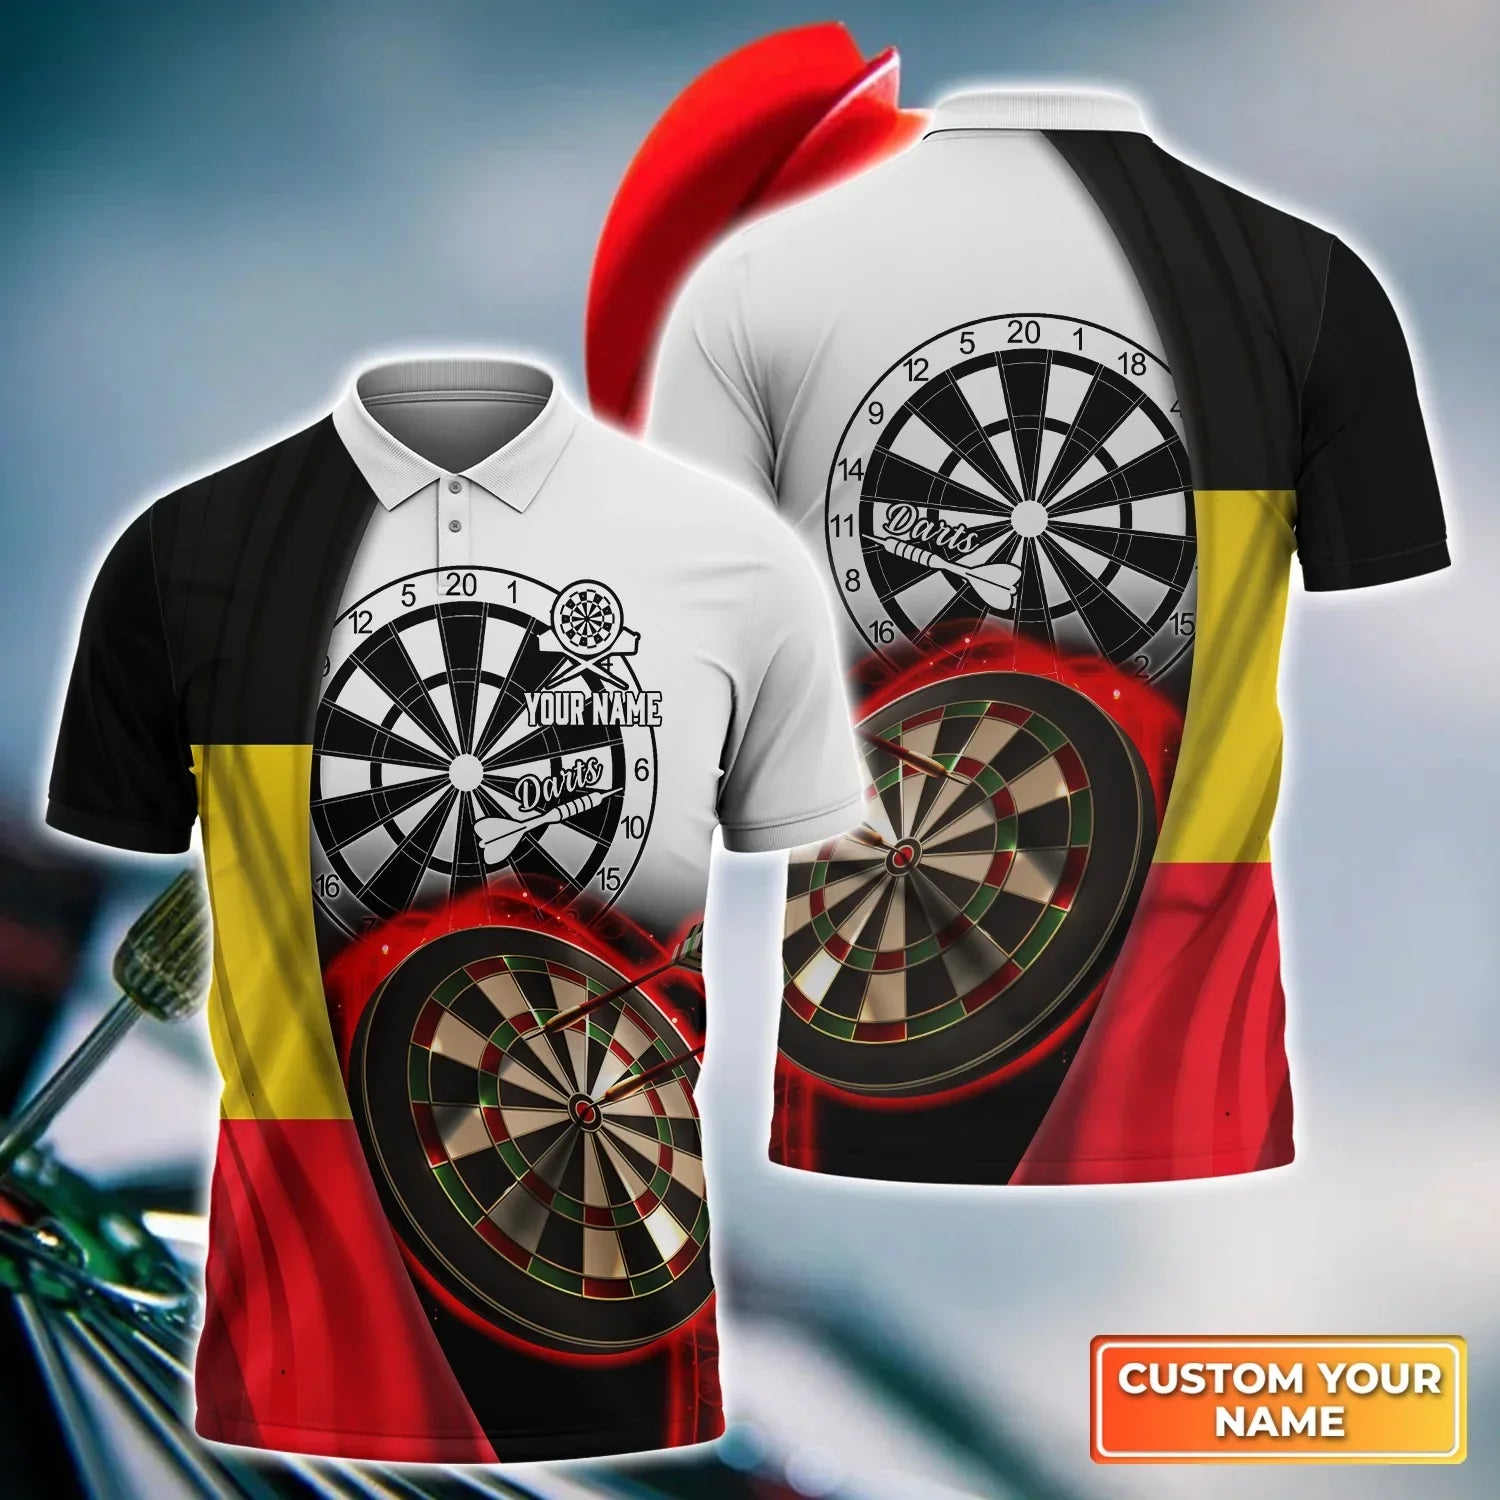 American Darts Player Polo 3D Shirt For Darts Player/ Dart Shirt/ Sports Shirt/ Dart Team Shirts